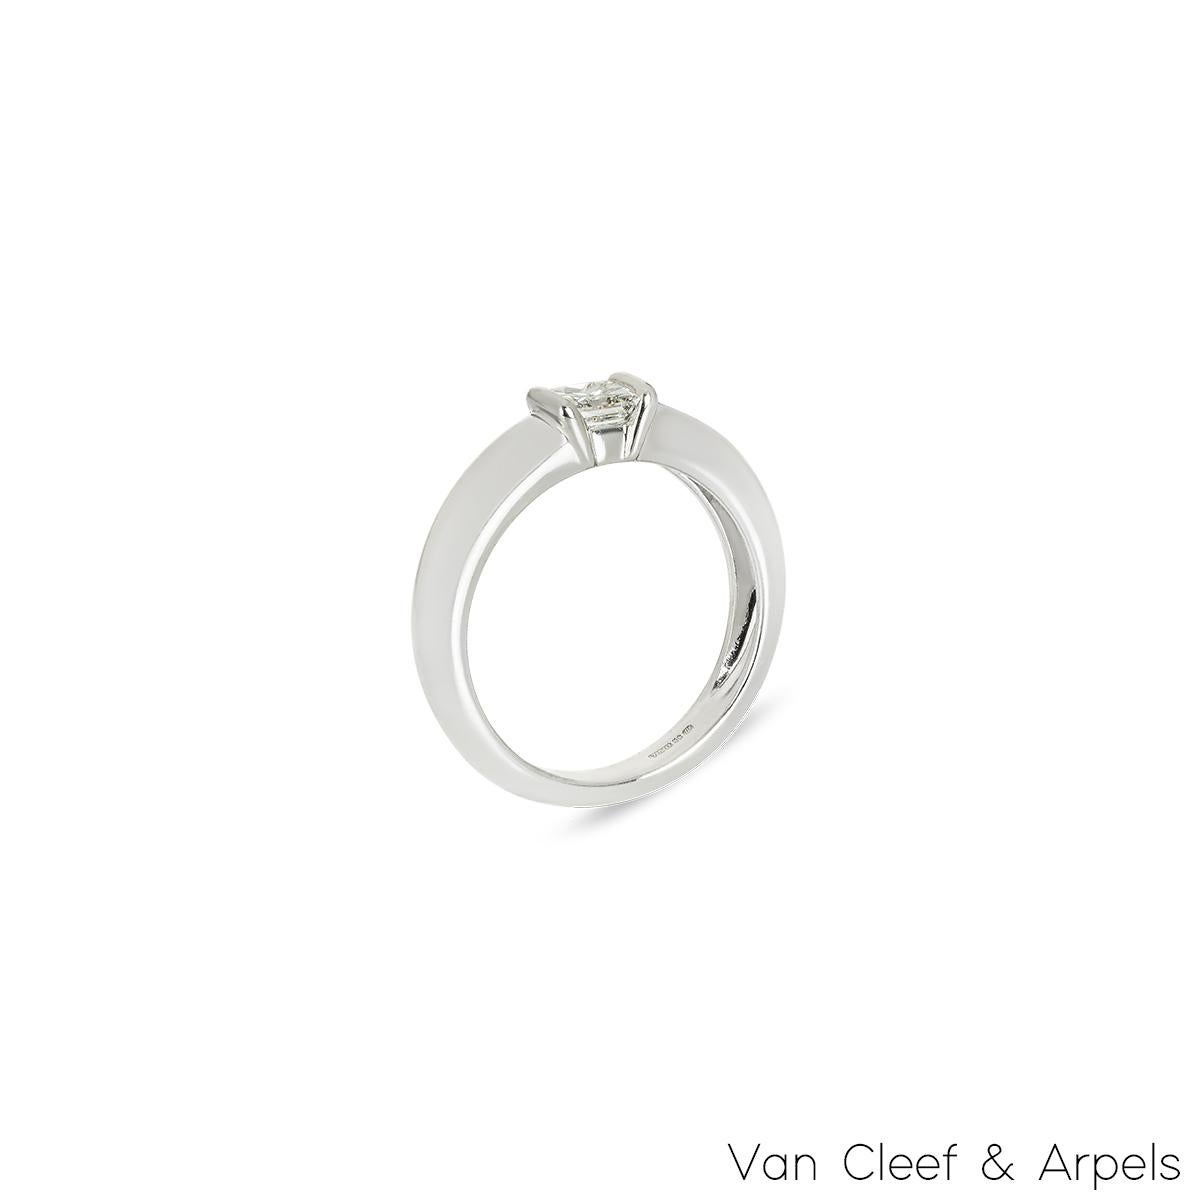 A beautiful 18k white gold Van Cleef & Arpels engagement ring from the Bridal collection. The ring comprises of a princess cut diamond in a tension setting with a total weight of 0.24ct, E colour and VVS+ clarity. The ring measures a size UK M / EU